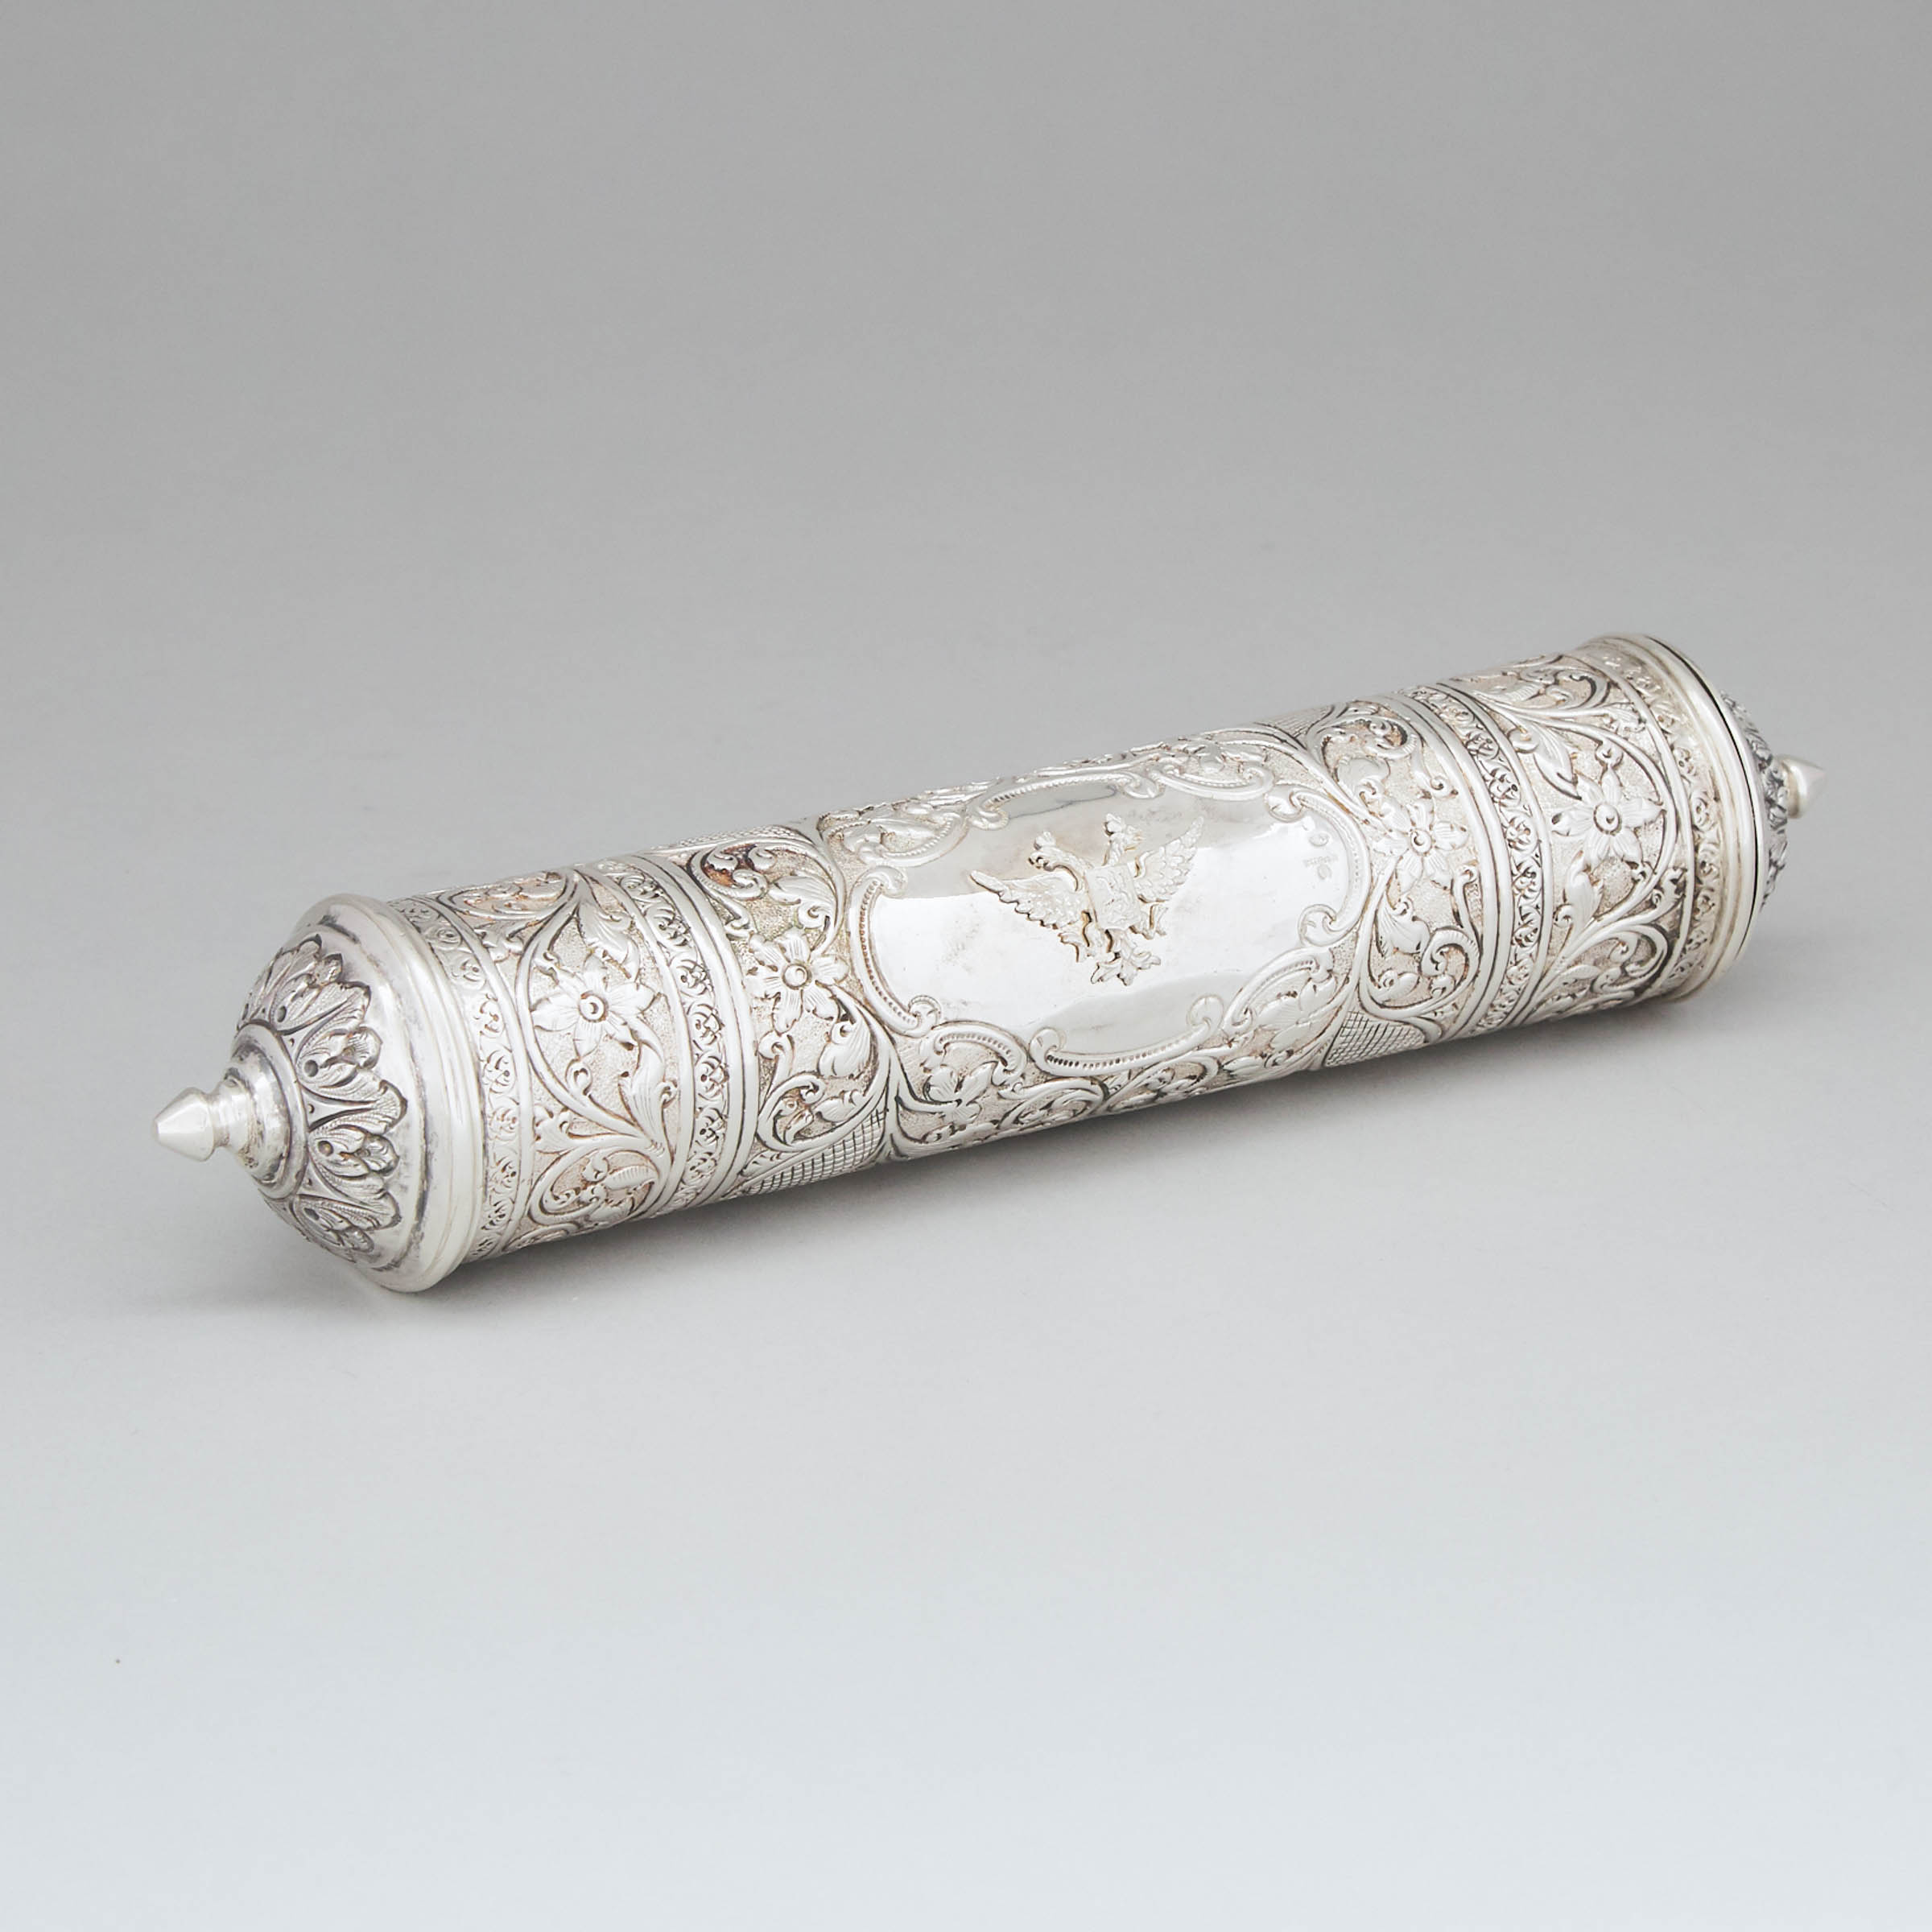 Silver Torah Scroll Case, probably Russian, 20th century